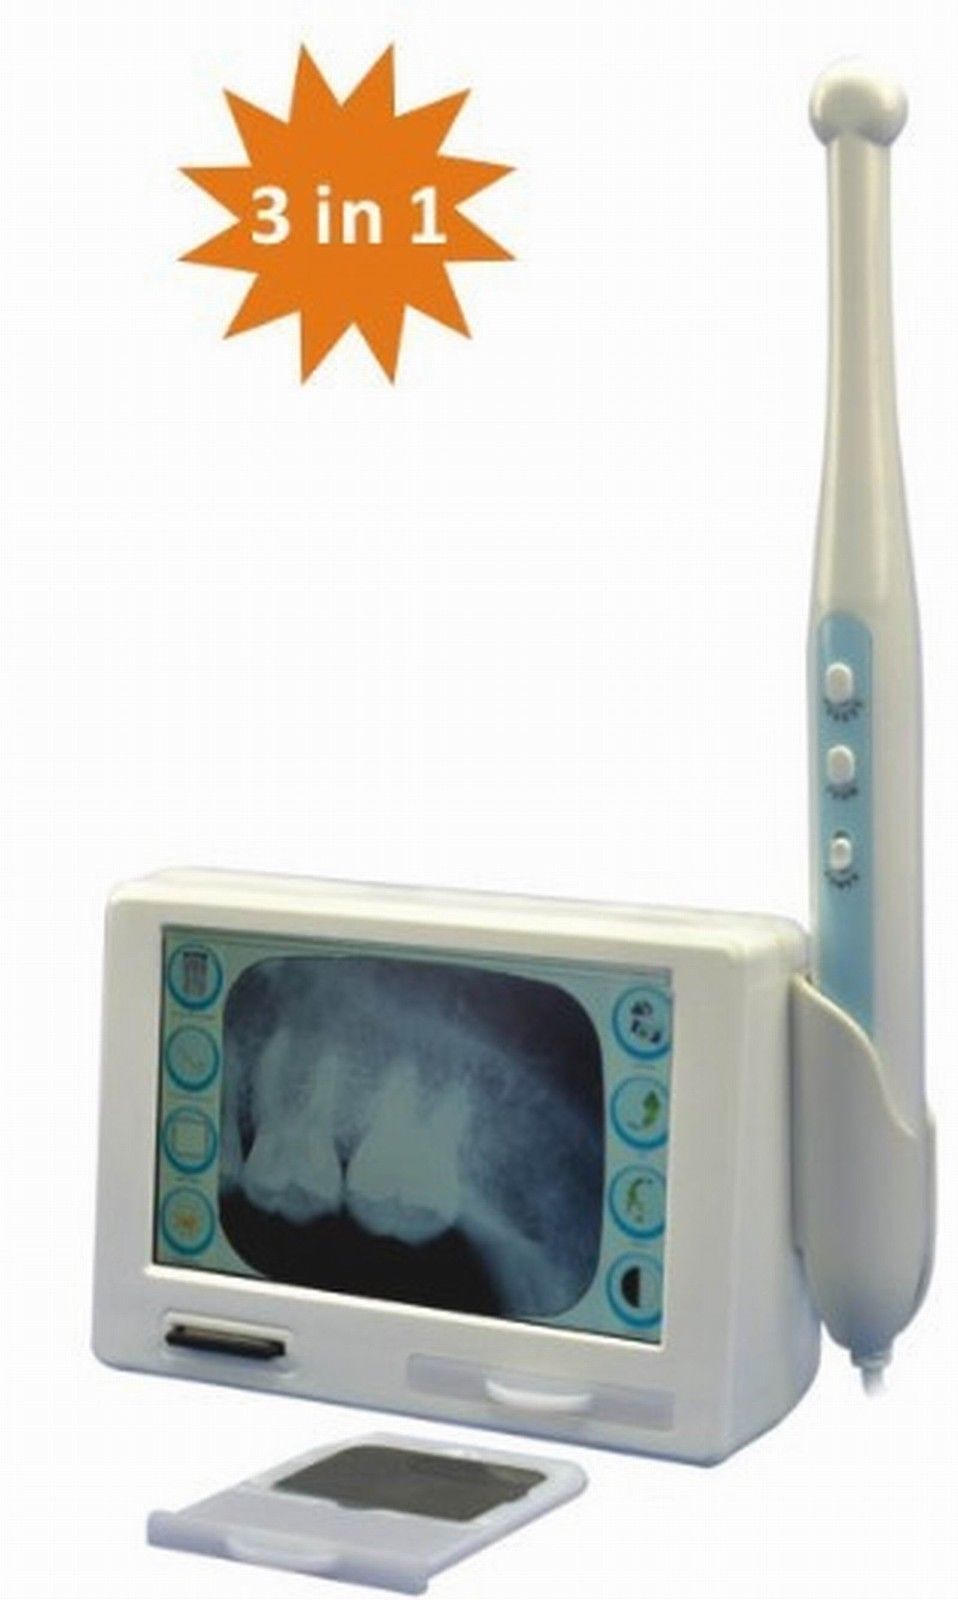 DX-FR31 X-ray Film Reader with Intraoral Camera